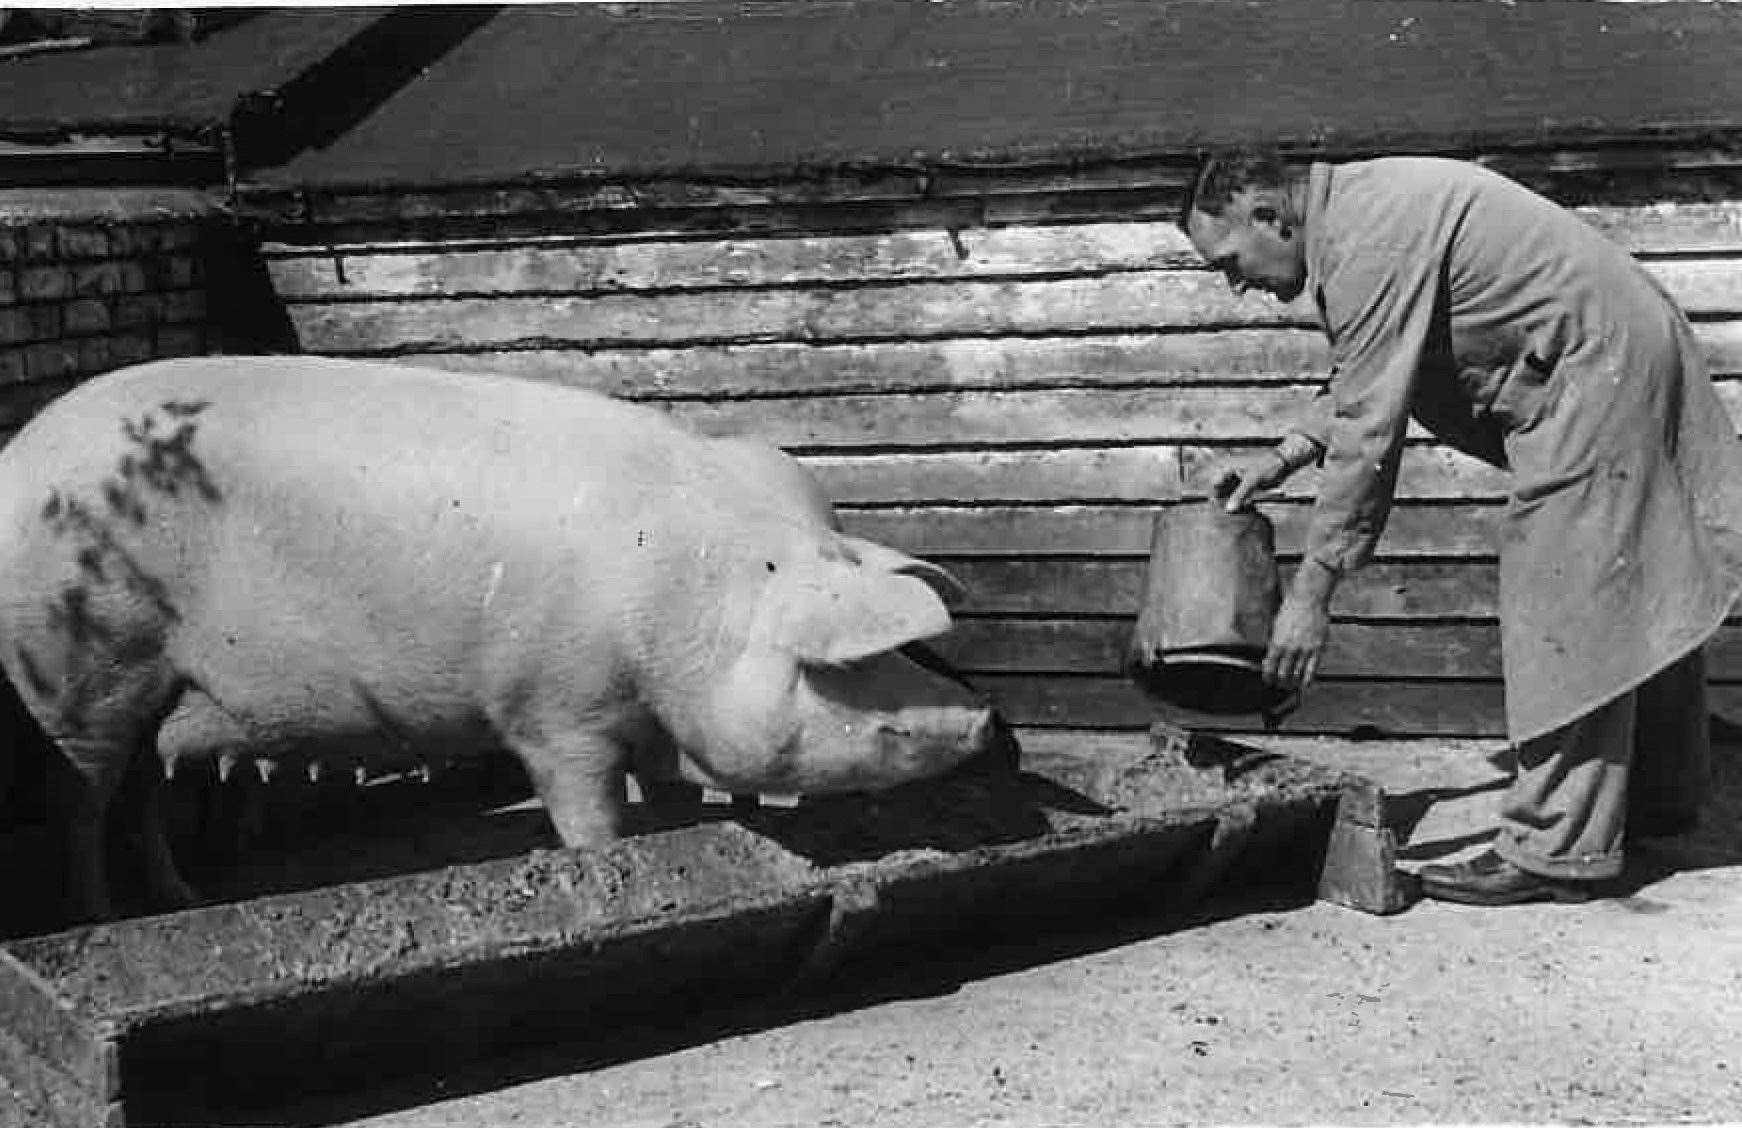 Some believe that Orwell got his inspiration for Animal Farm through working at the Preston Hall piggery